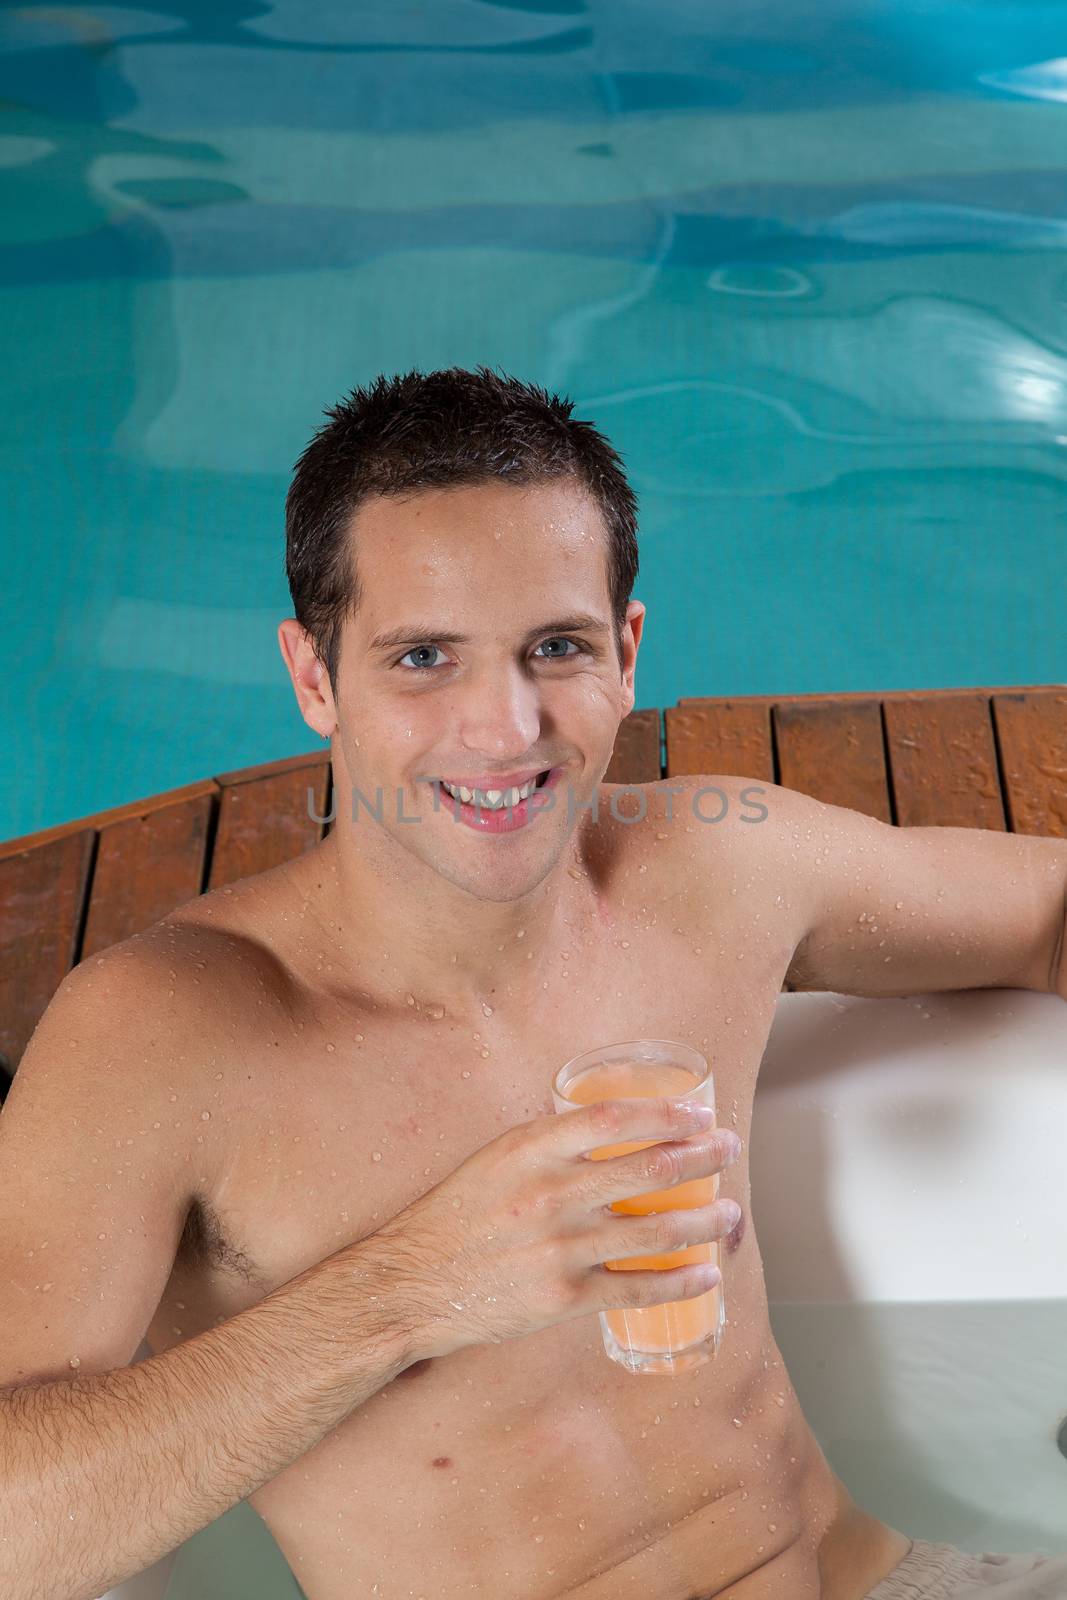 Man inside a jacuzzi drinking juice by ifilms